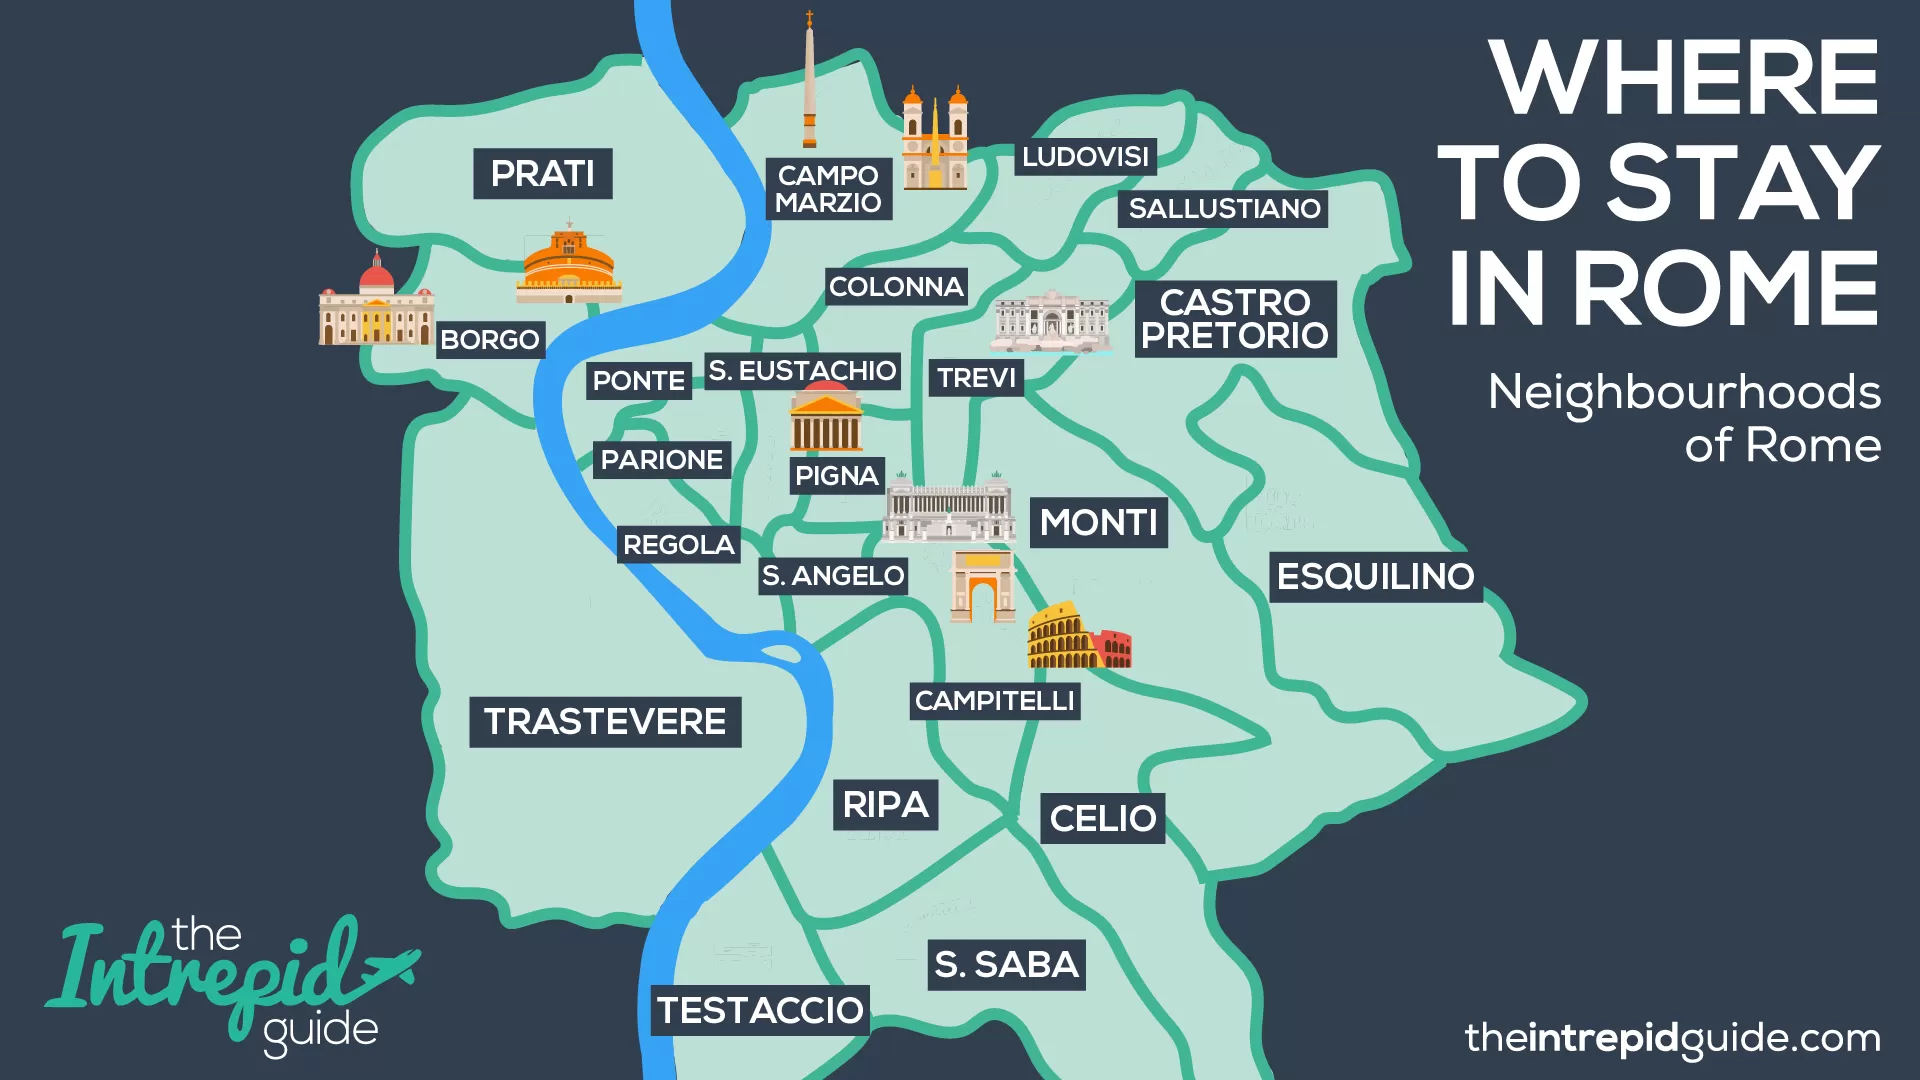 Hotels Near the Colosseum in Rome - Map of Neighbourhoods in Rome